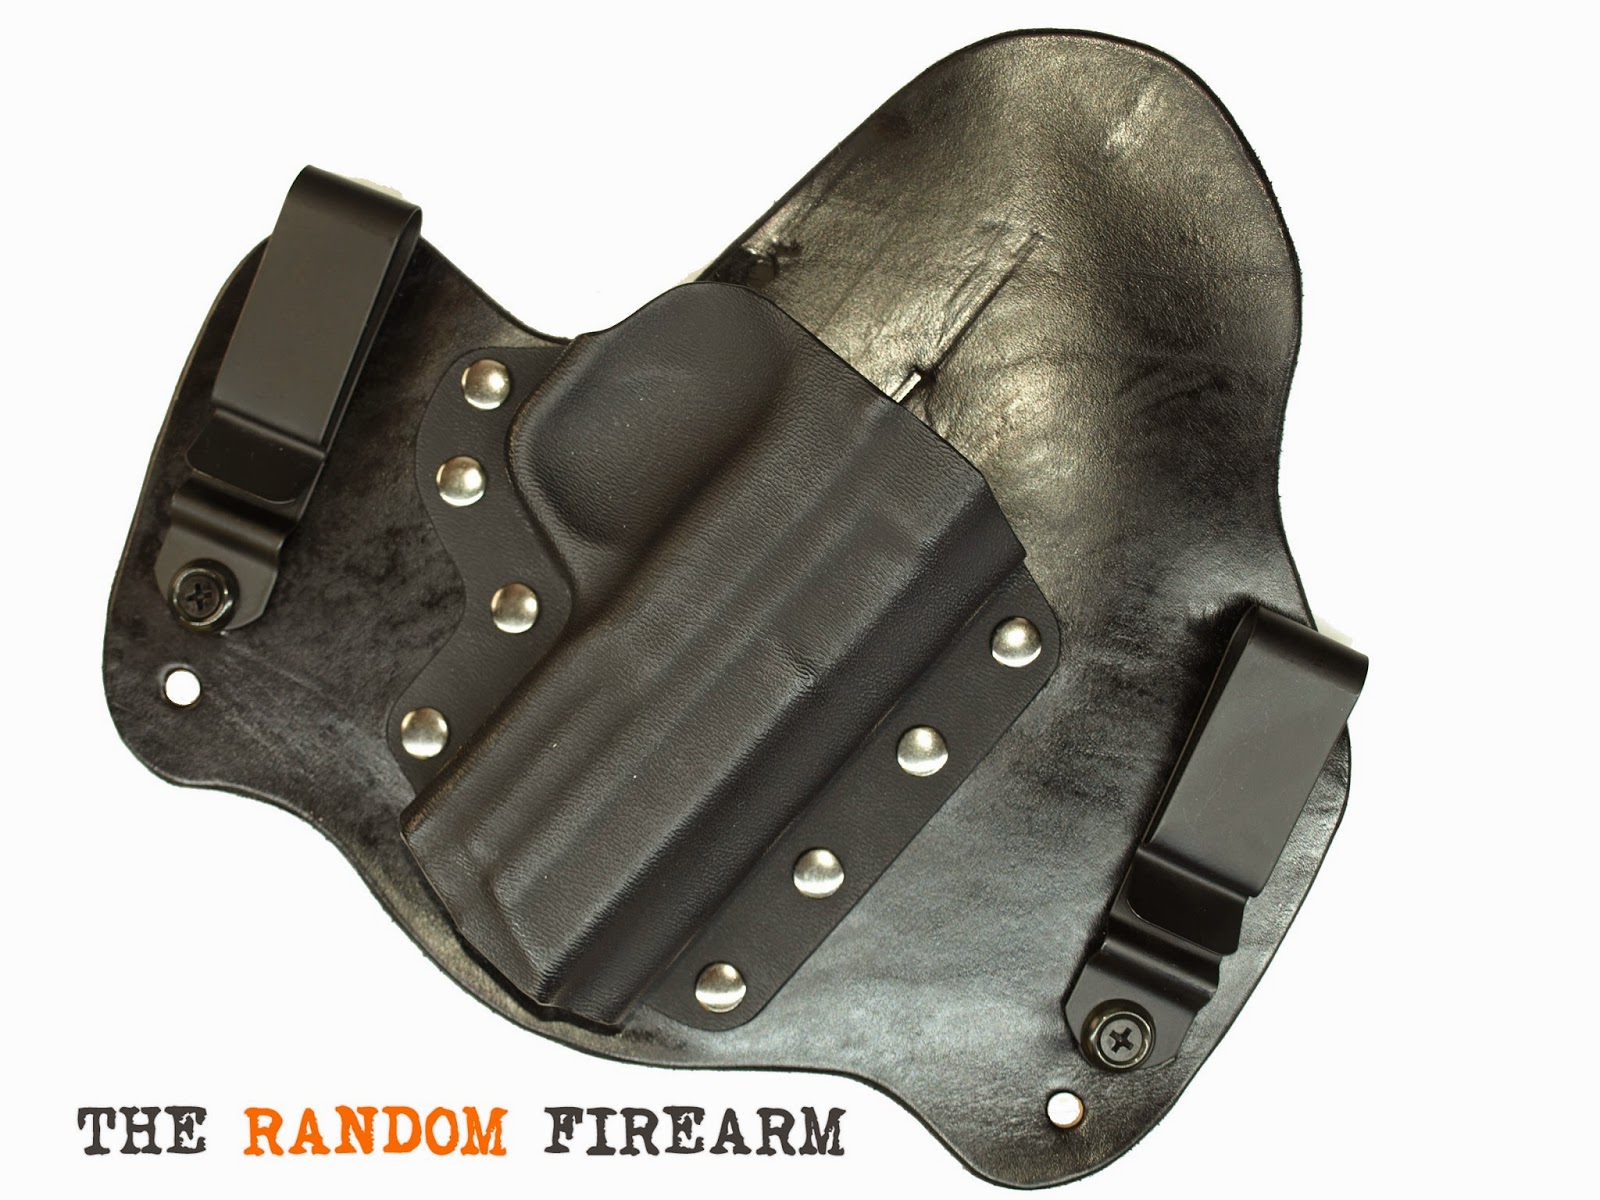 holster smith and wesson M&P9 iwb conealed carry tread softly concealment the random firearm db productions